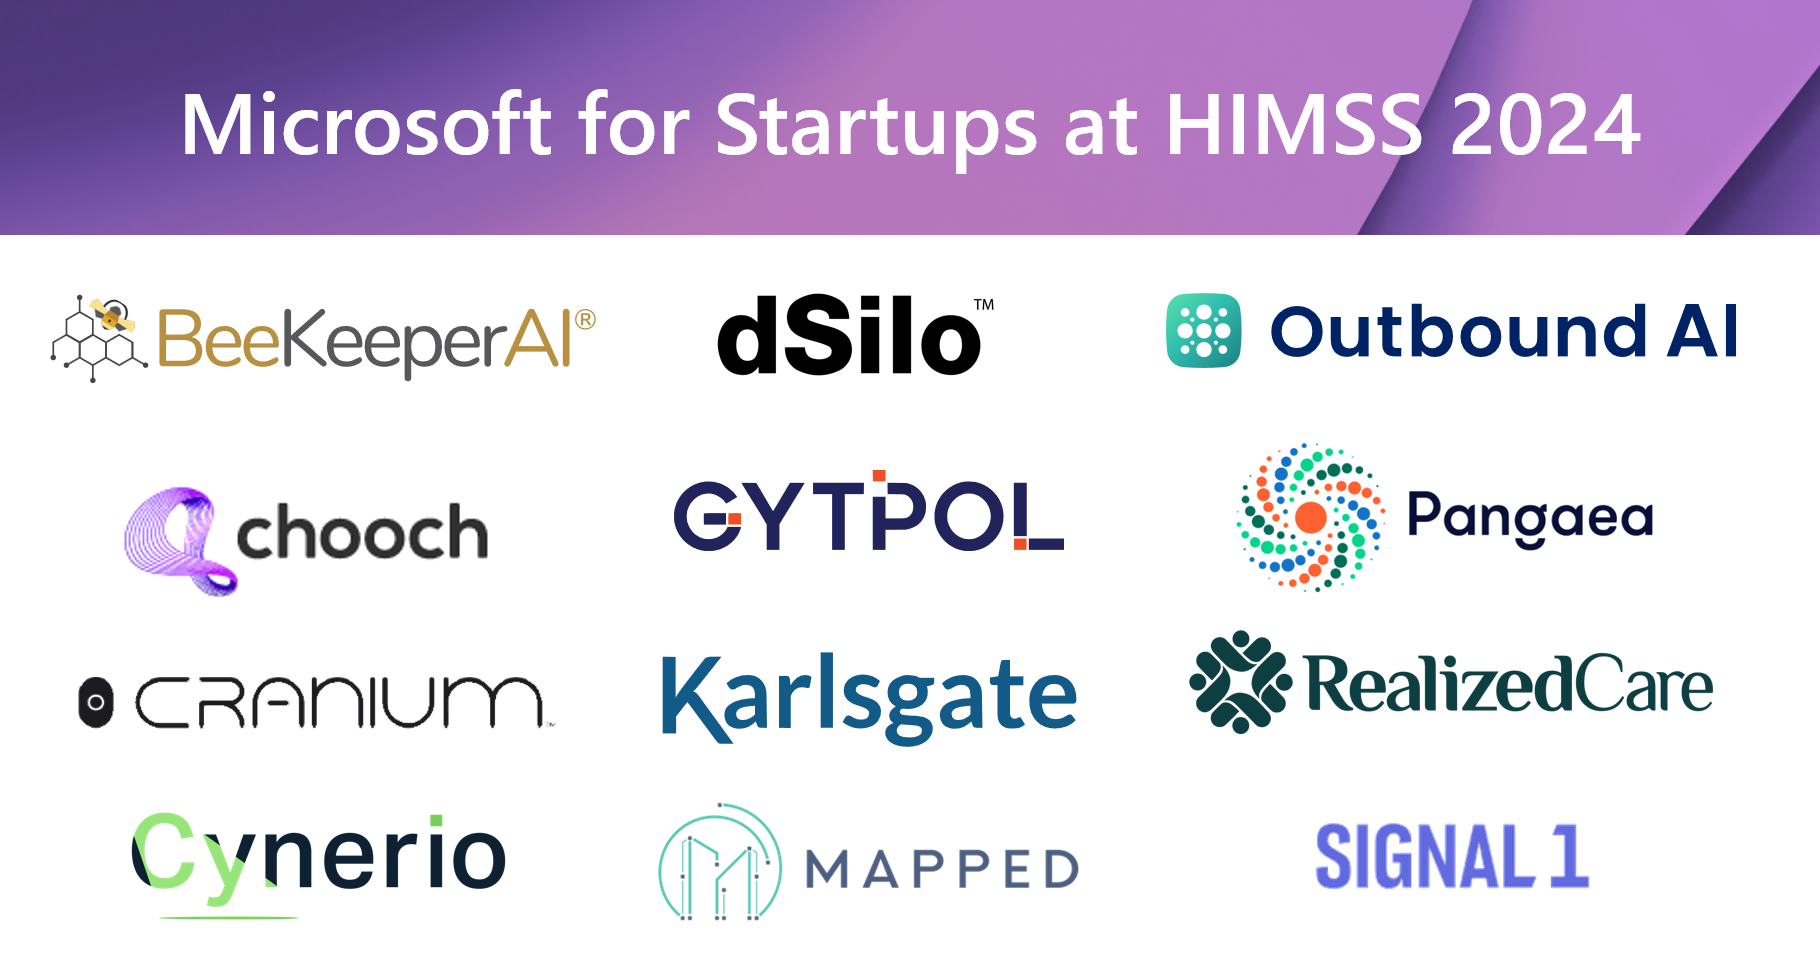 Read more about Join Microsoft for Startups at HIMSS 2024 for Innovative Healthcare Solutions